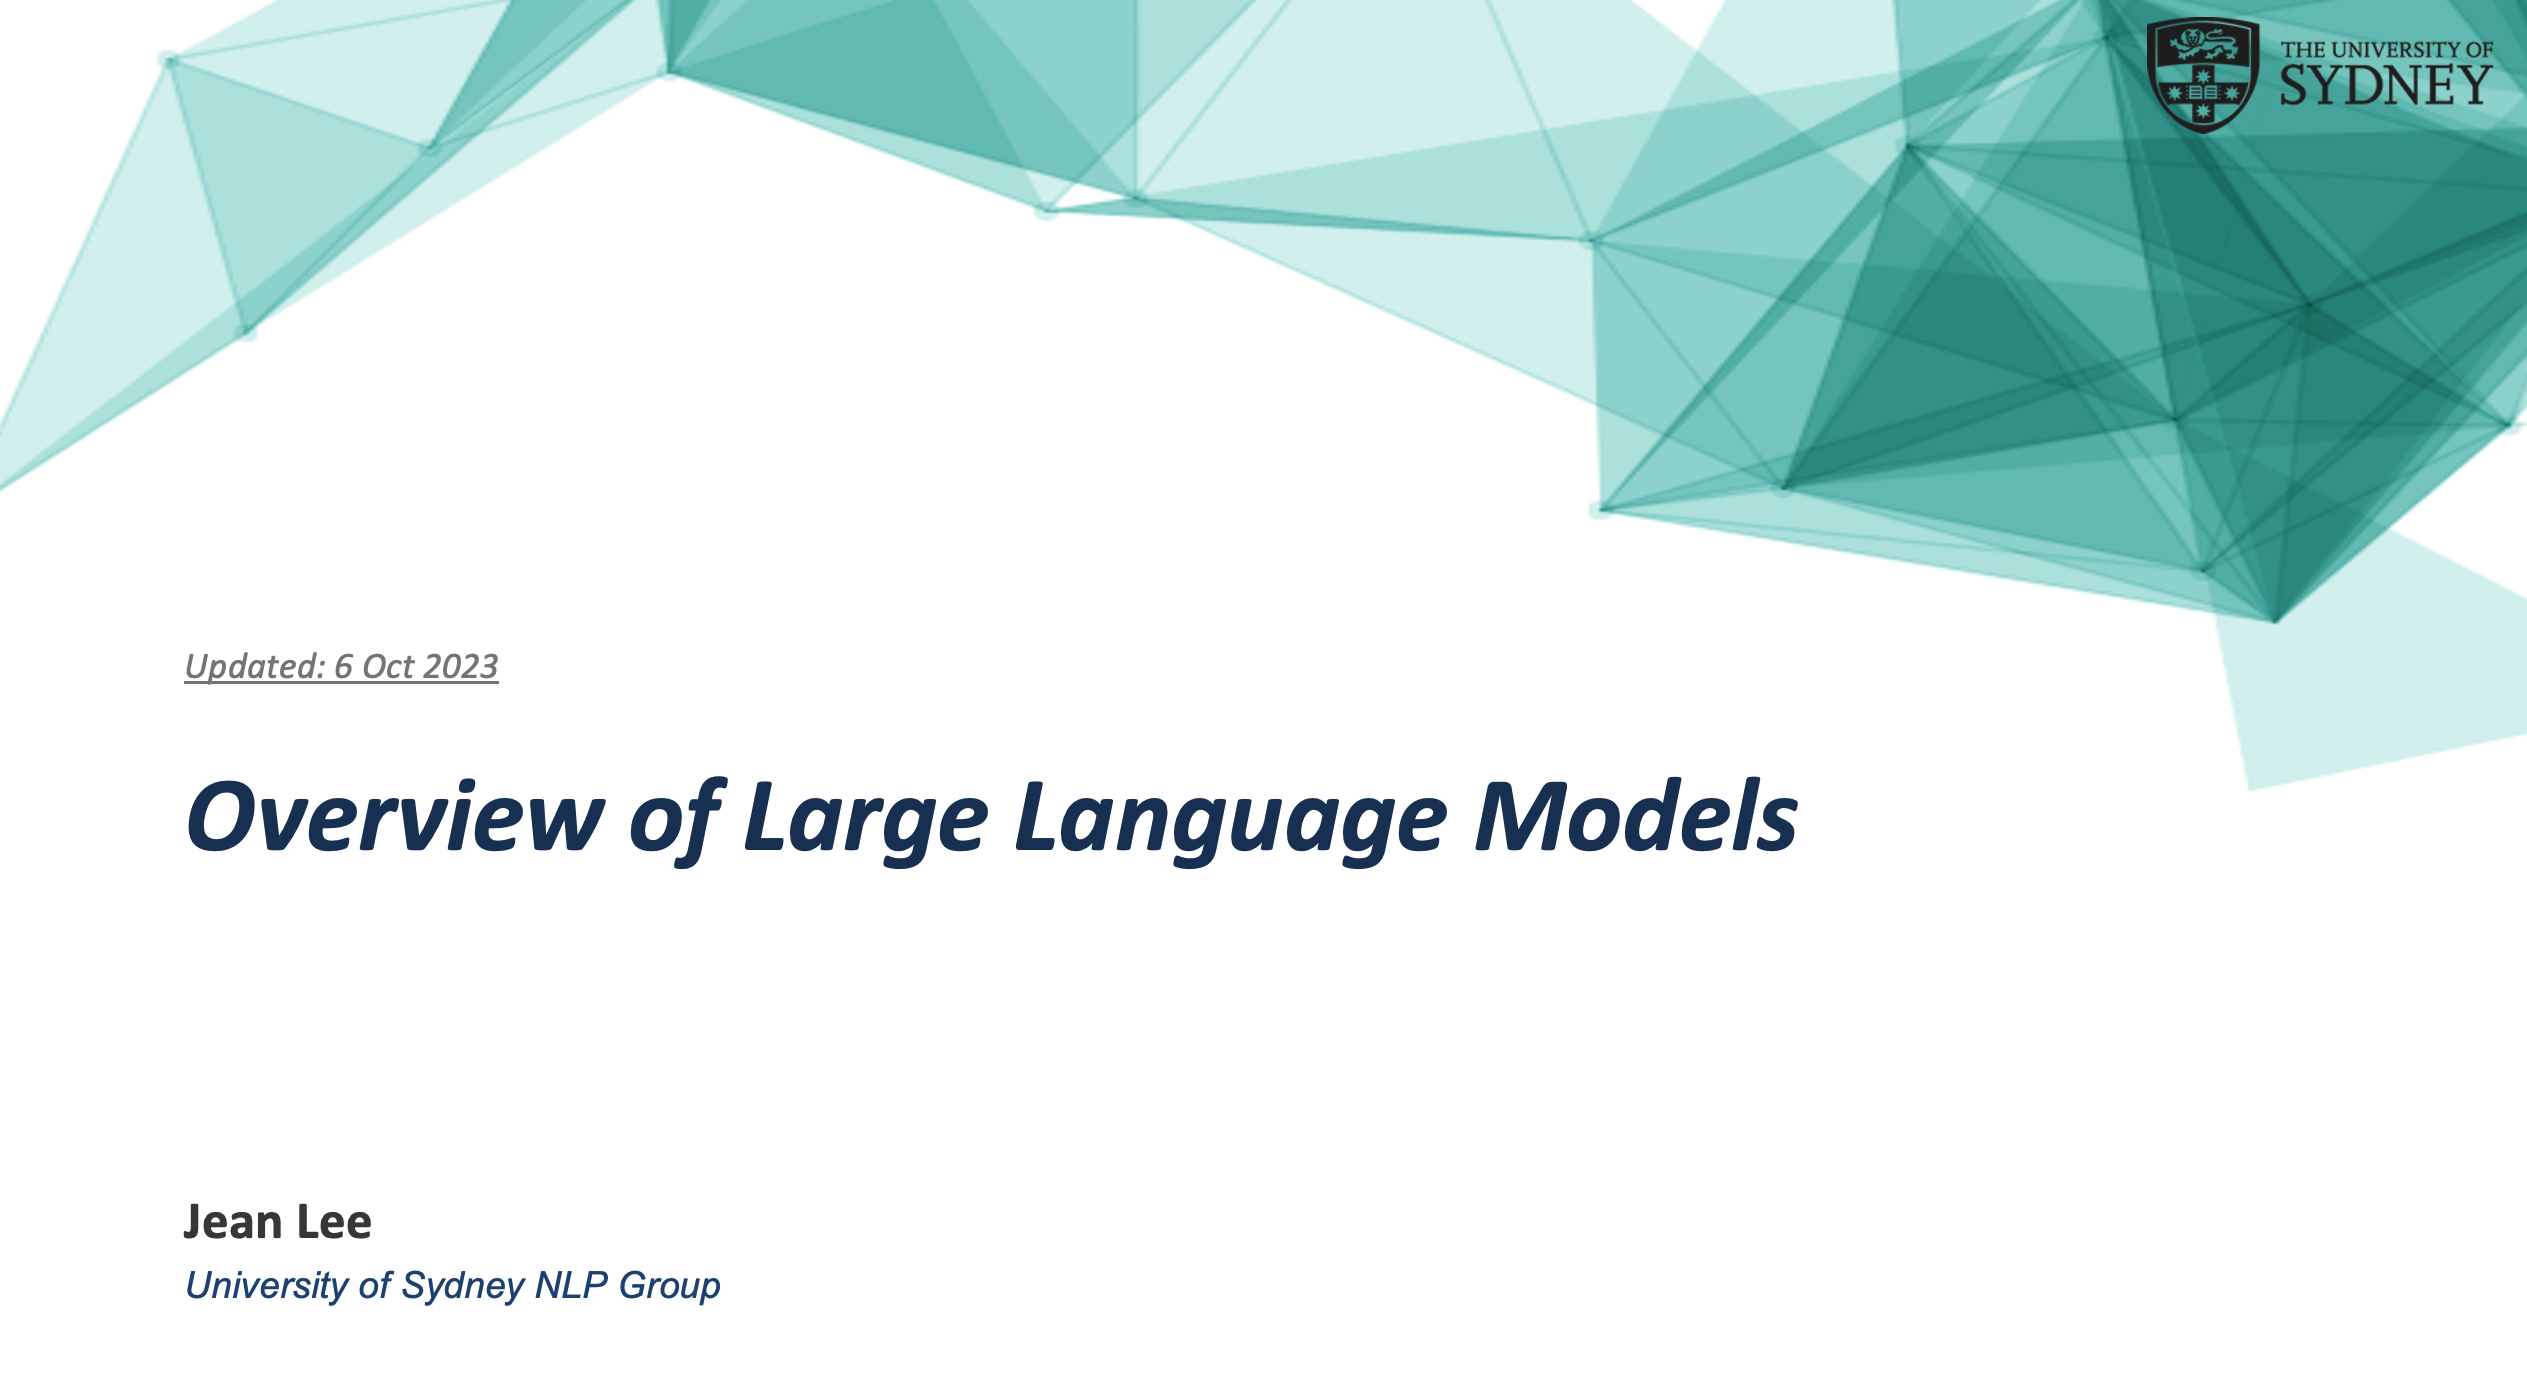 Overview of Large Language Models